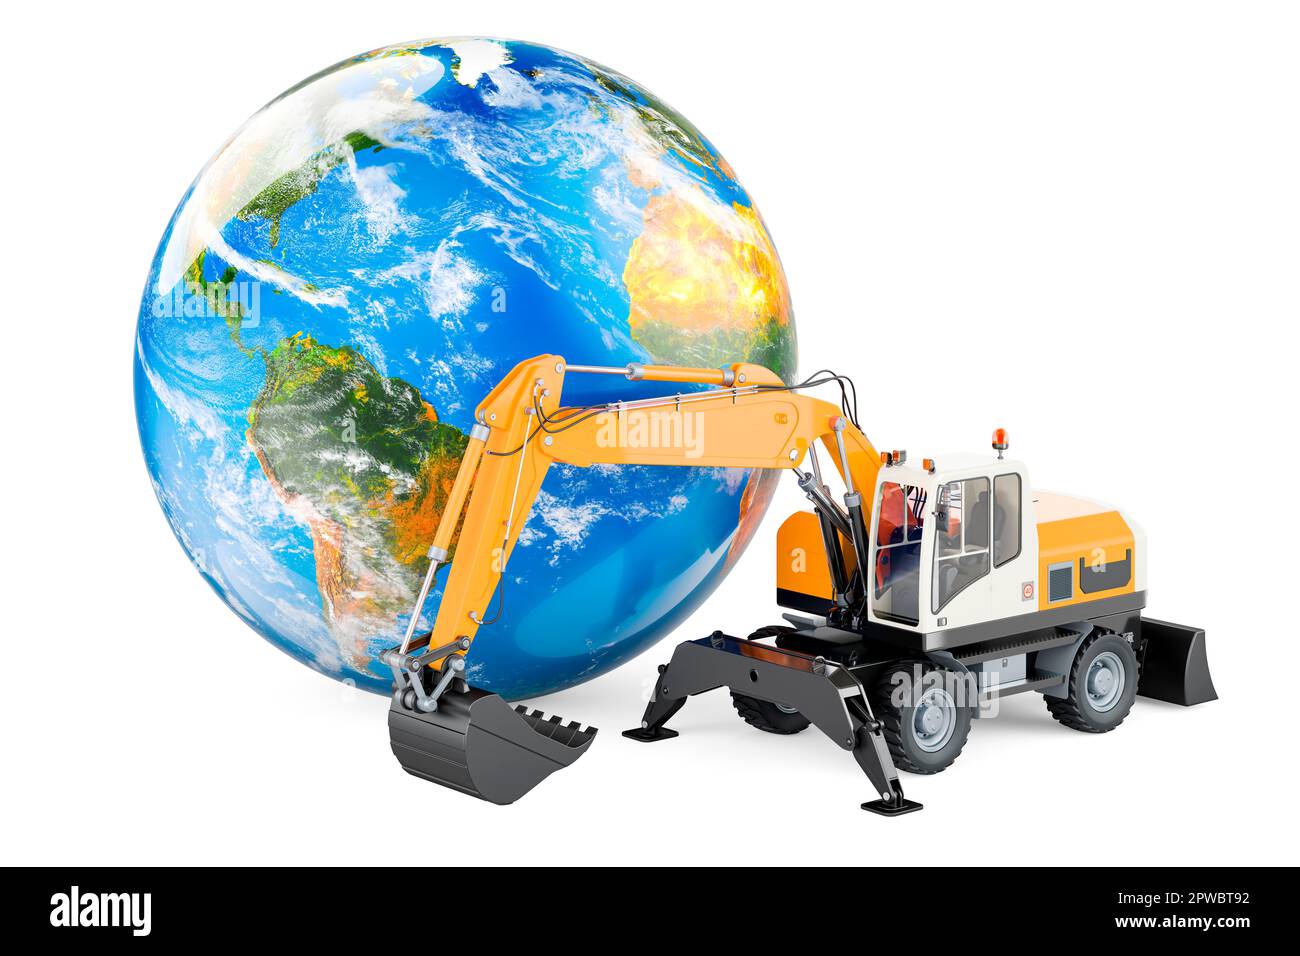 Excavator with Earth Globe, 3D rendering isolated on white background Stock Photo